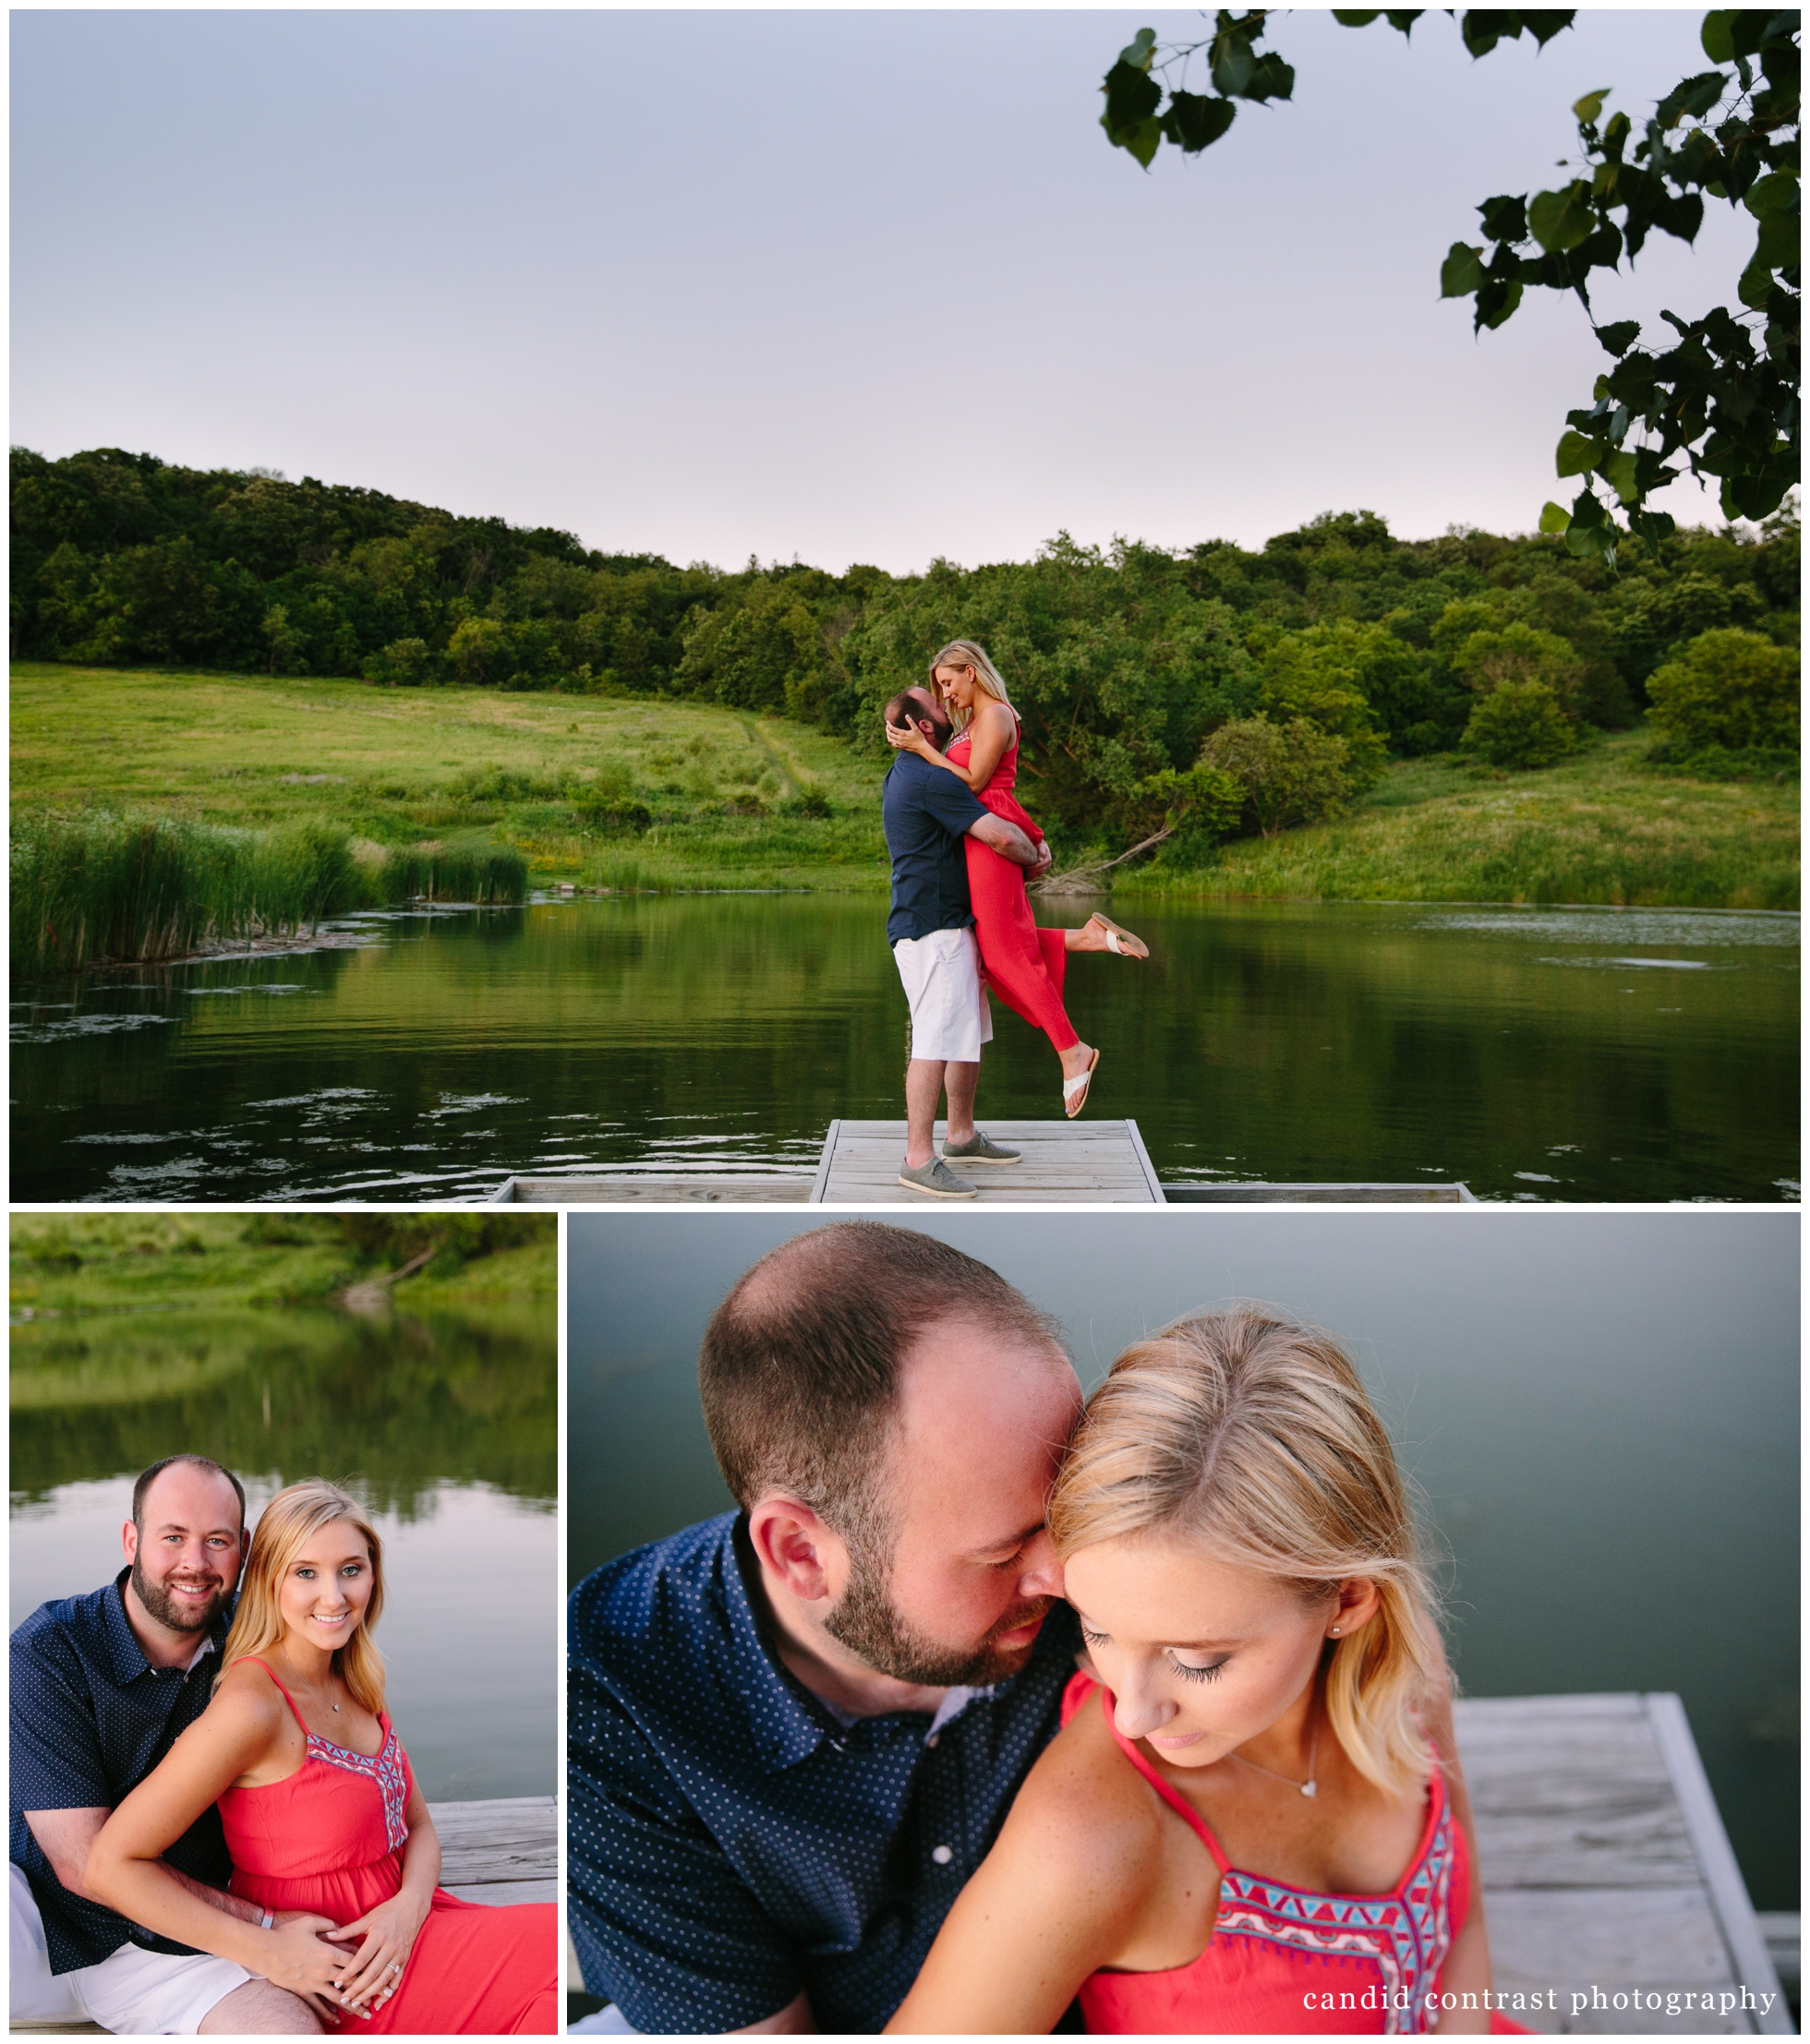 romantic engagement session at lorelei cabins in dubuque iowa, iowa wedding photographer candid contrast photography